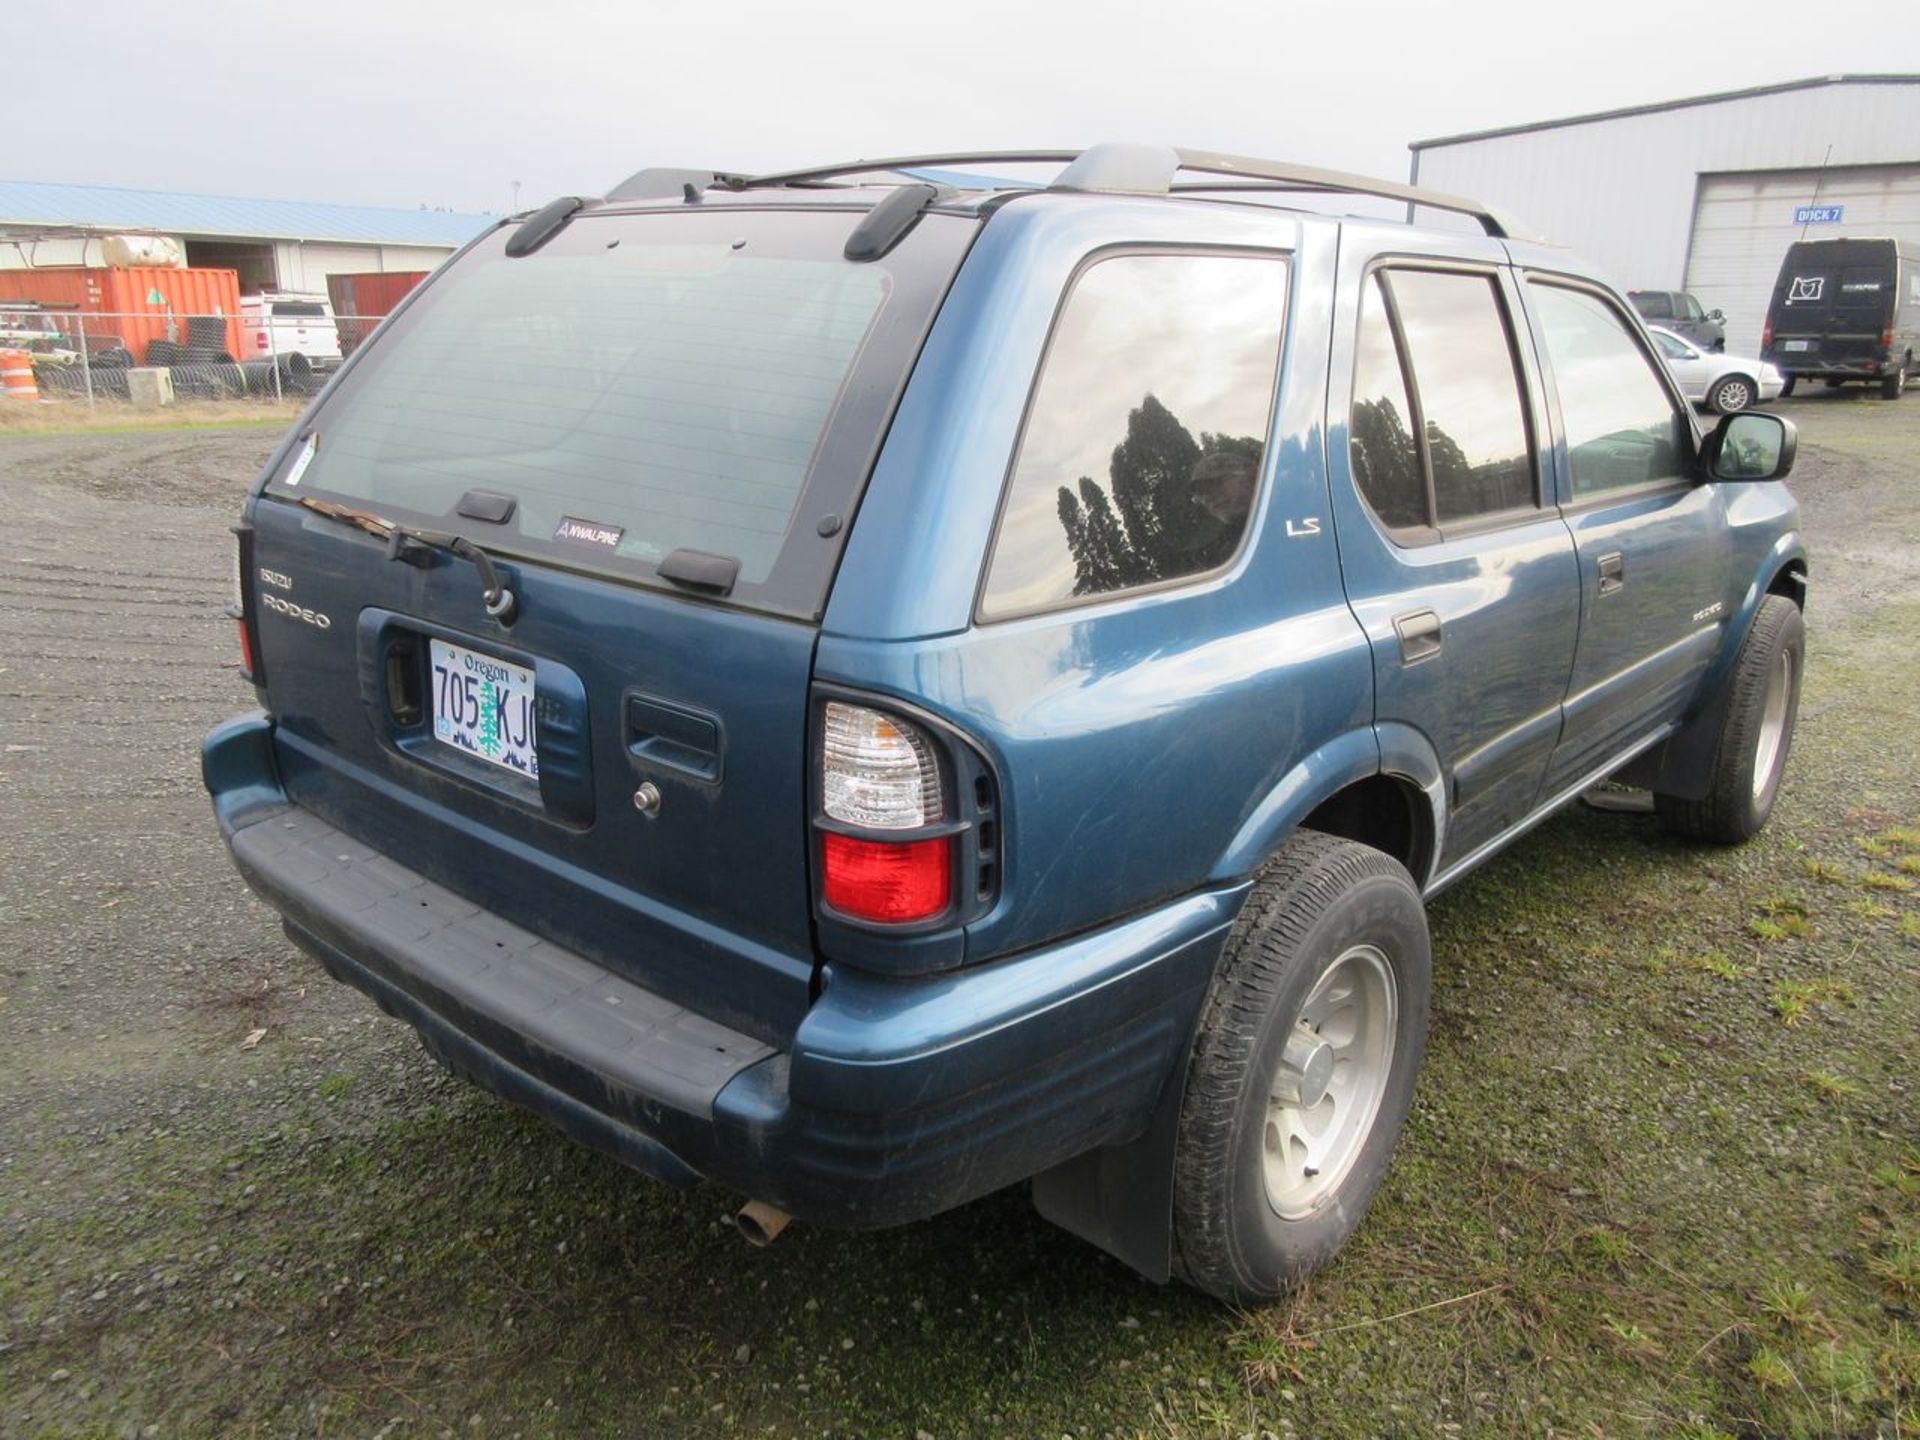 Isuzu Rodeo LS 4-Door Sports Utility Vehicle, VIN: 4S2CK58W914361609 (2001); with V6 Gas Engine, - Image 3 of 7